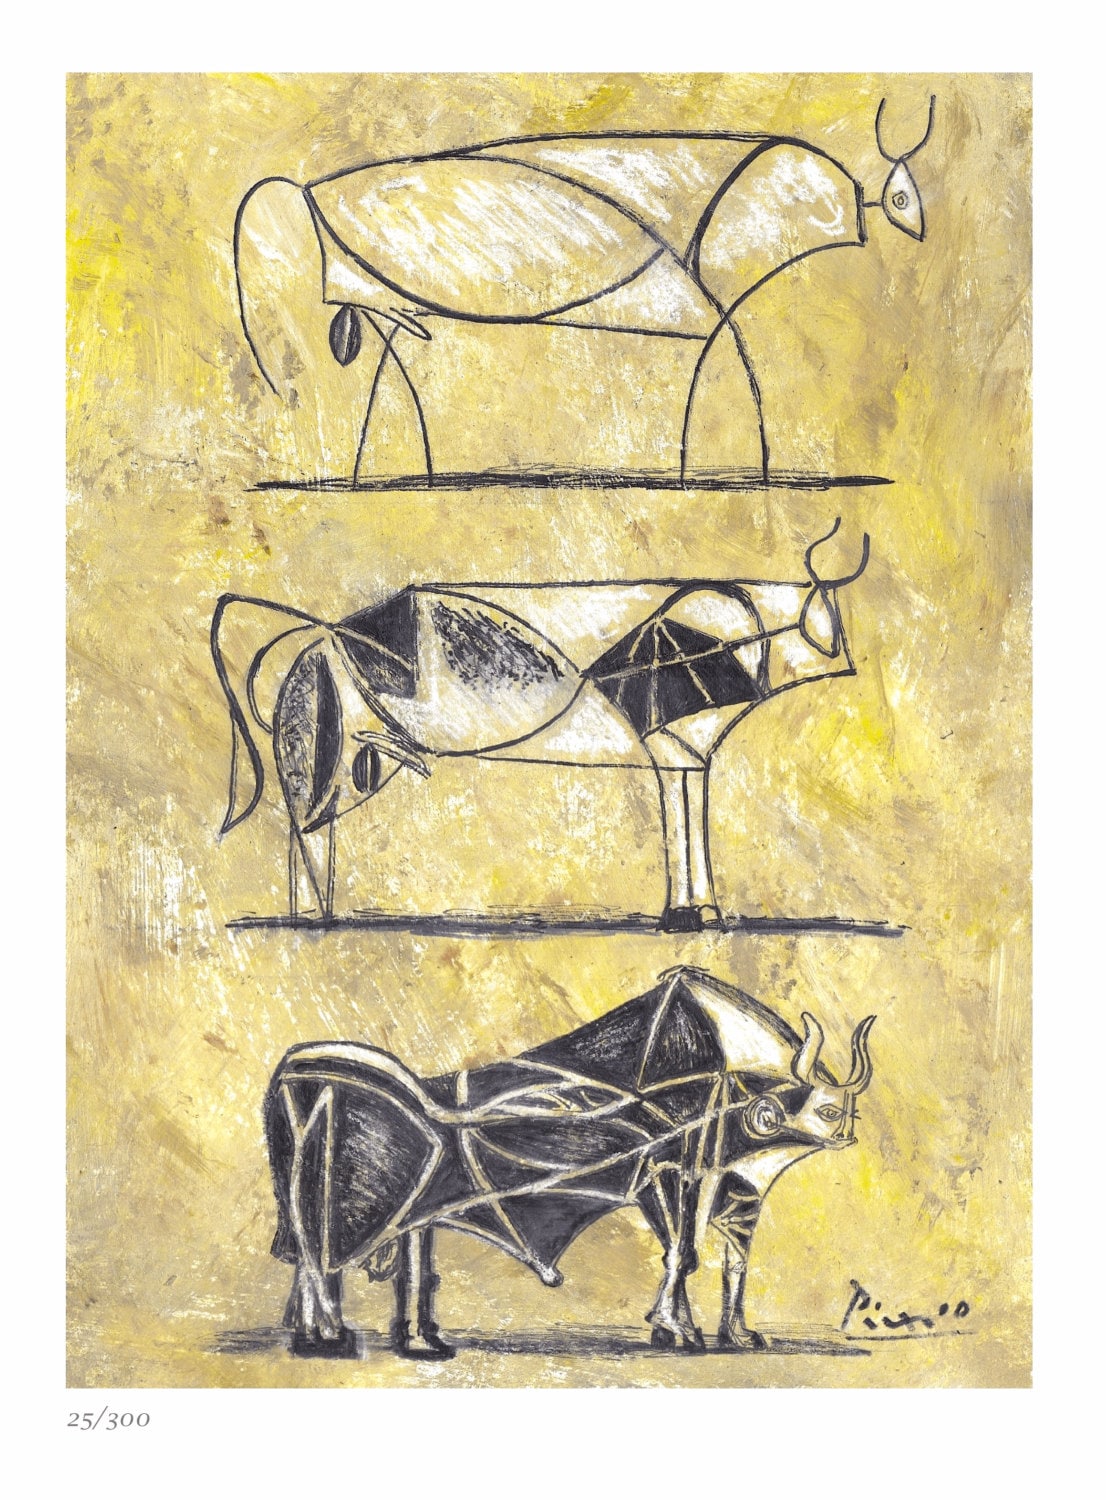 What We Learned from the Evolution of Picasso Bull